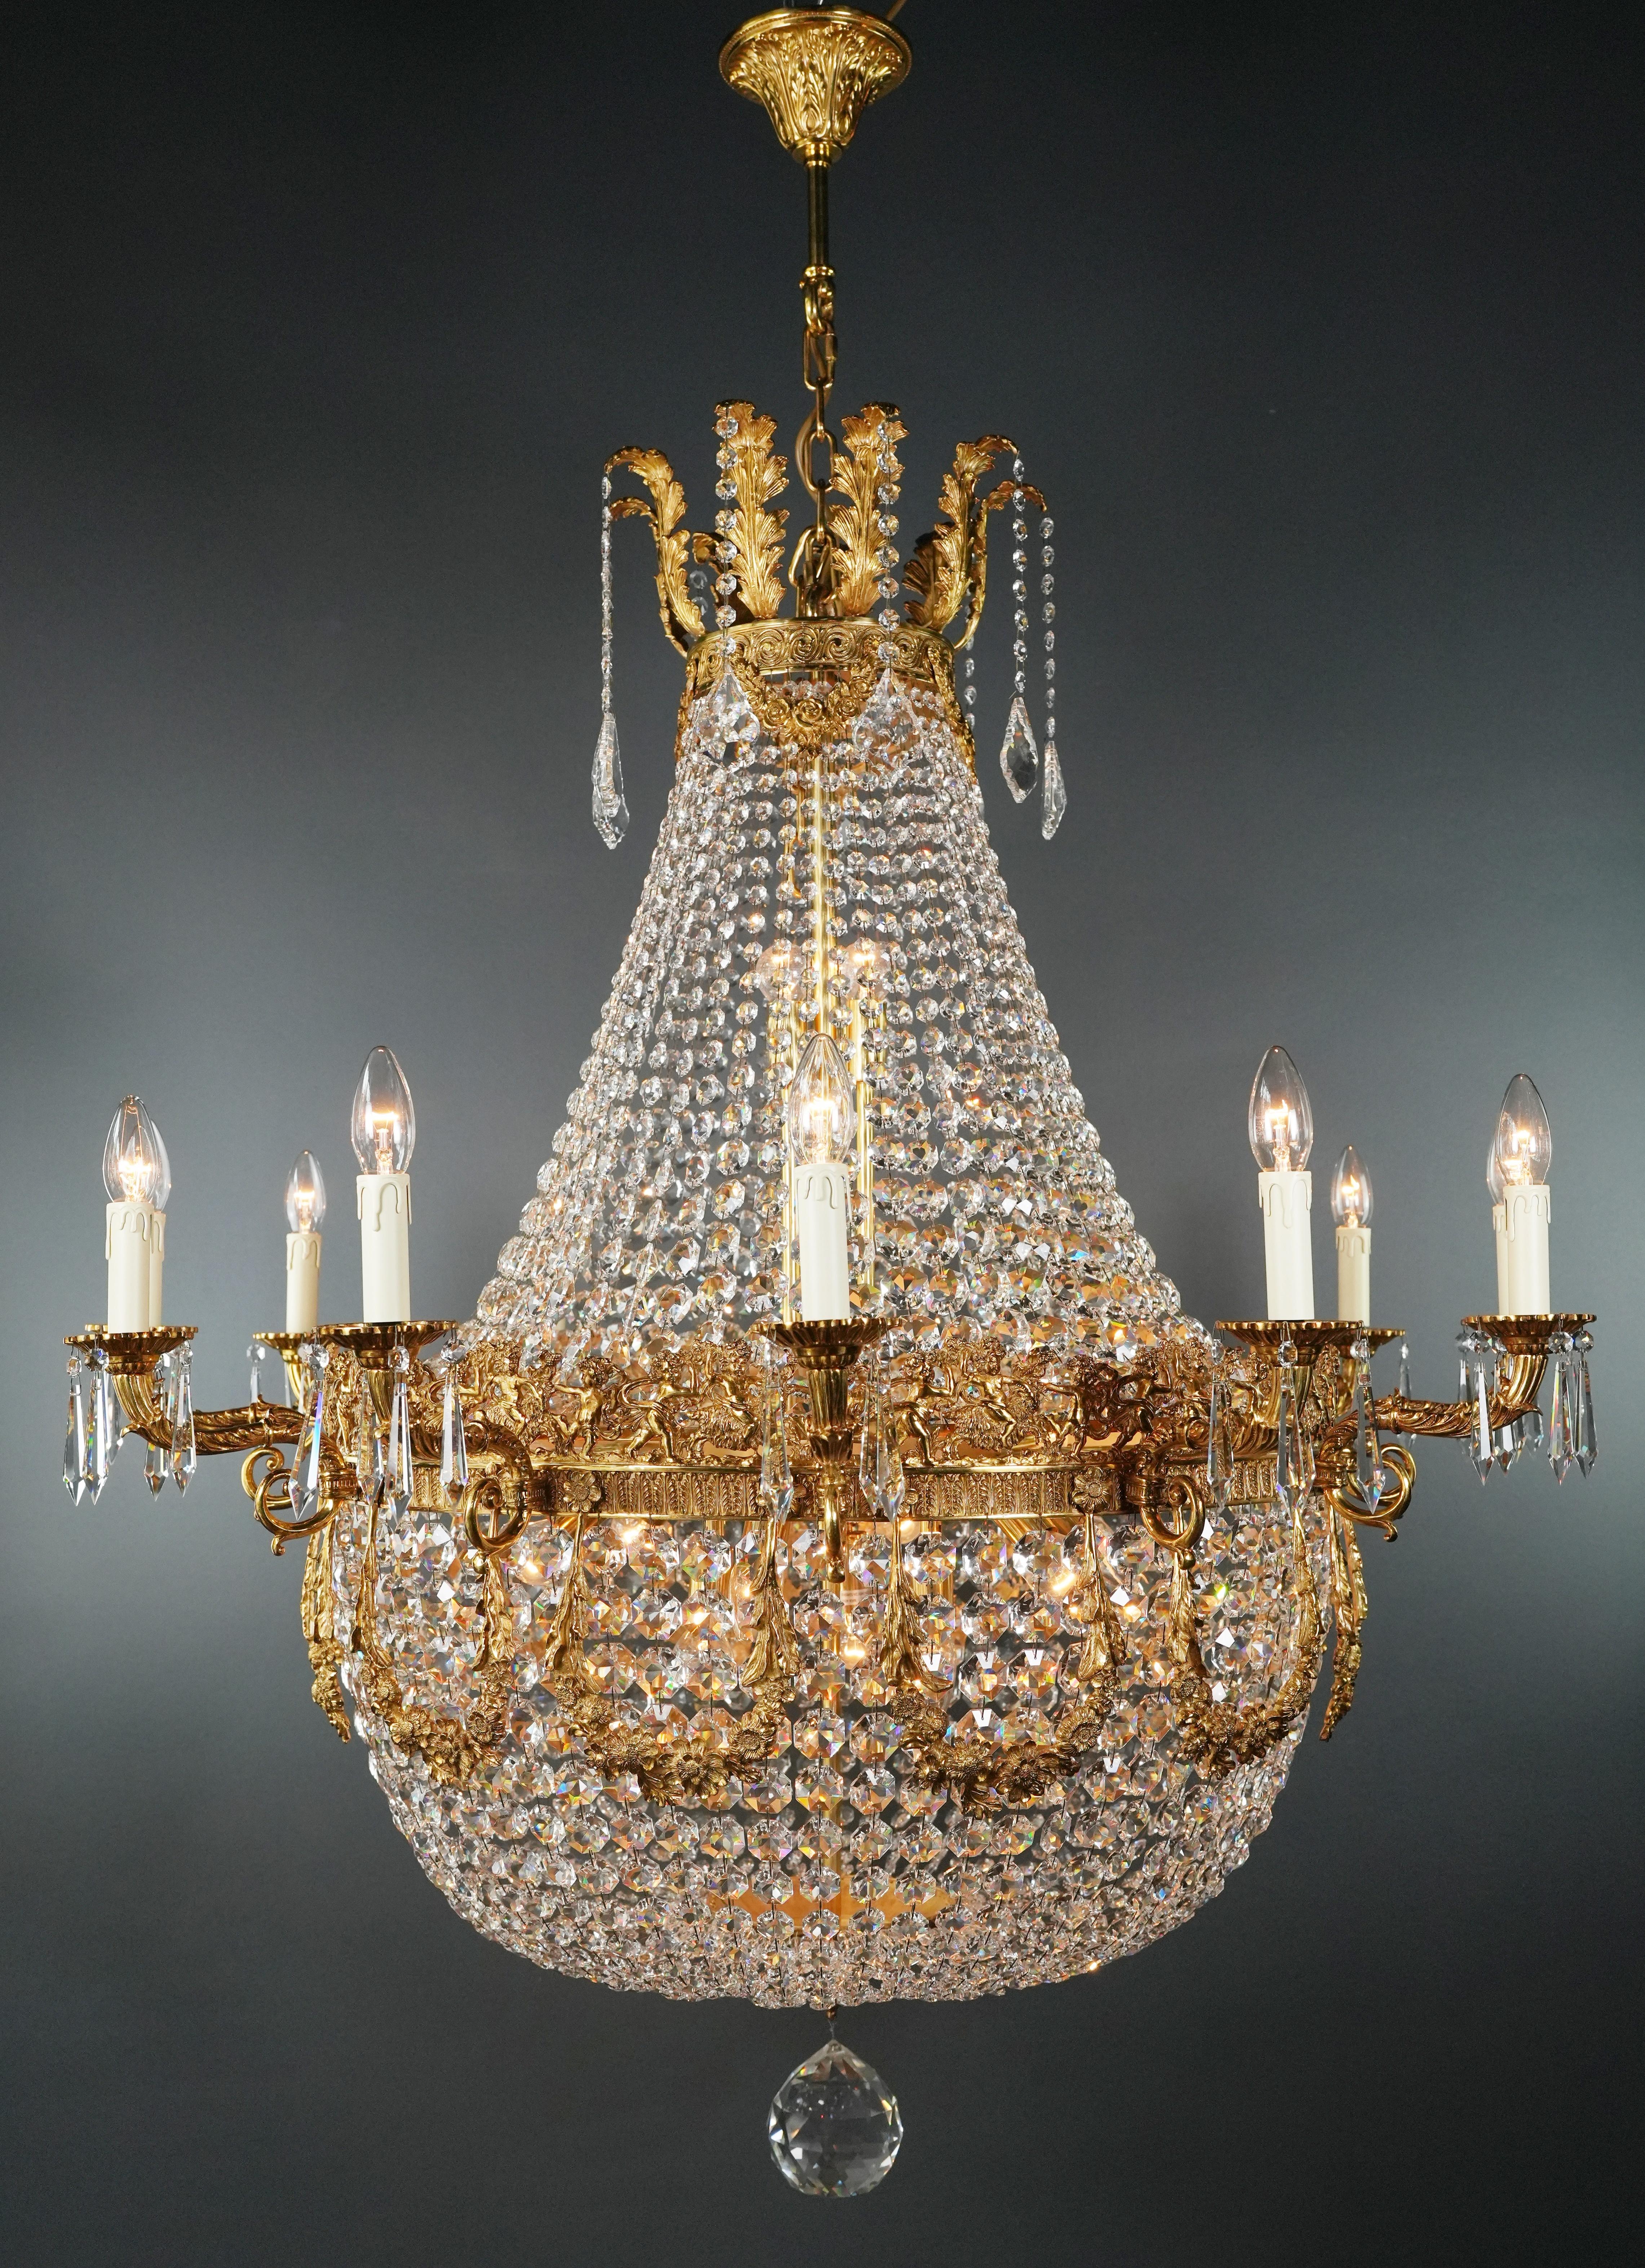 Introducing a stunning Brass Basket Empire Sac a Pearl Chandelier, an exquisite piece adorned with captivating crystals, reminiscent of the classical style of the Empire era. This is a new reproduction, and several are available, ensuring you can